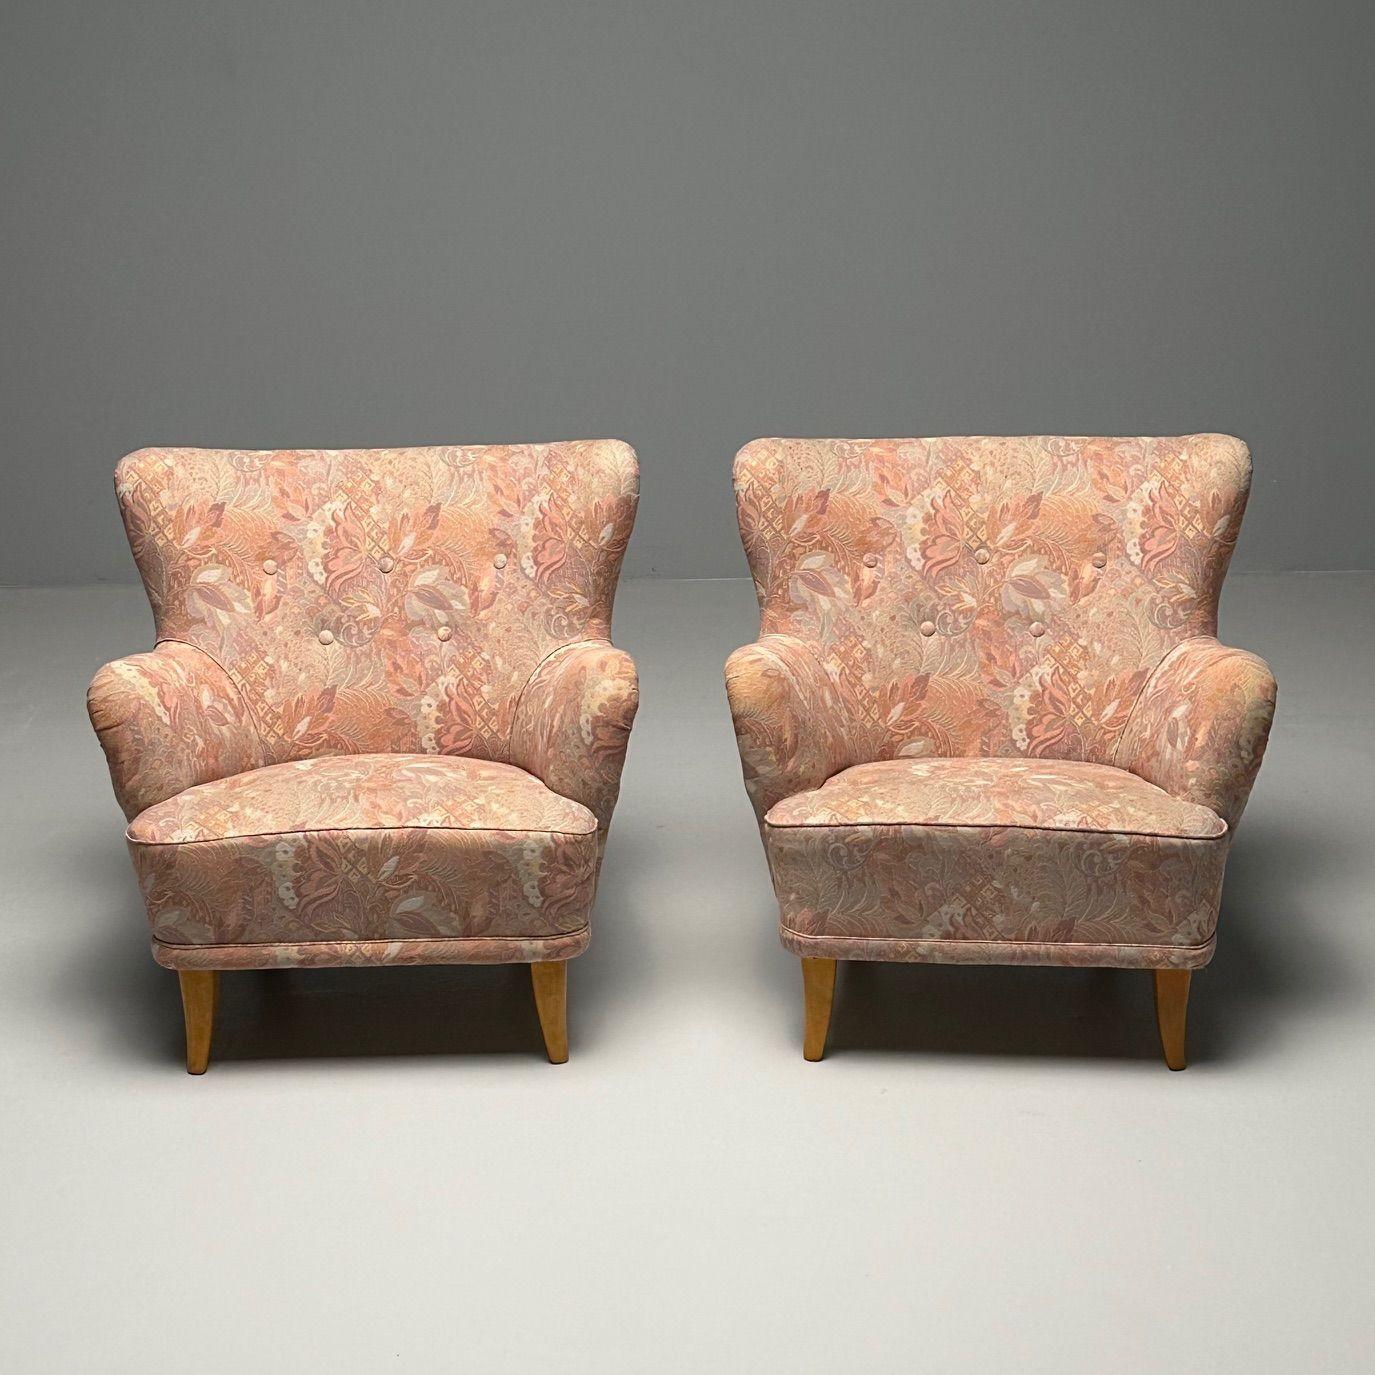 Ilmari Lappalainen, Asko, Swedish Mid-Century Modern, Laila Lounge Chairs, Floral Fabric, Beechwood

Pair of 'Laila' lounge chairs designed by Ilmari Lappalainen and produced by Asko in Finland, circa 1950s.

Lacquered Beech, Fabric
Finland,